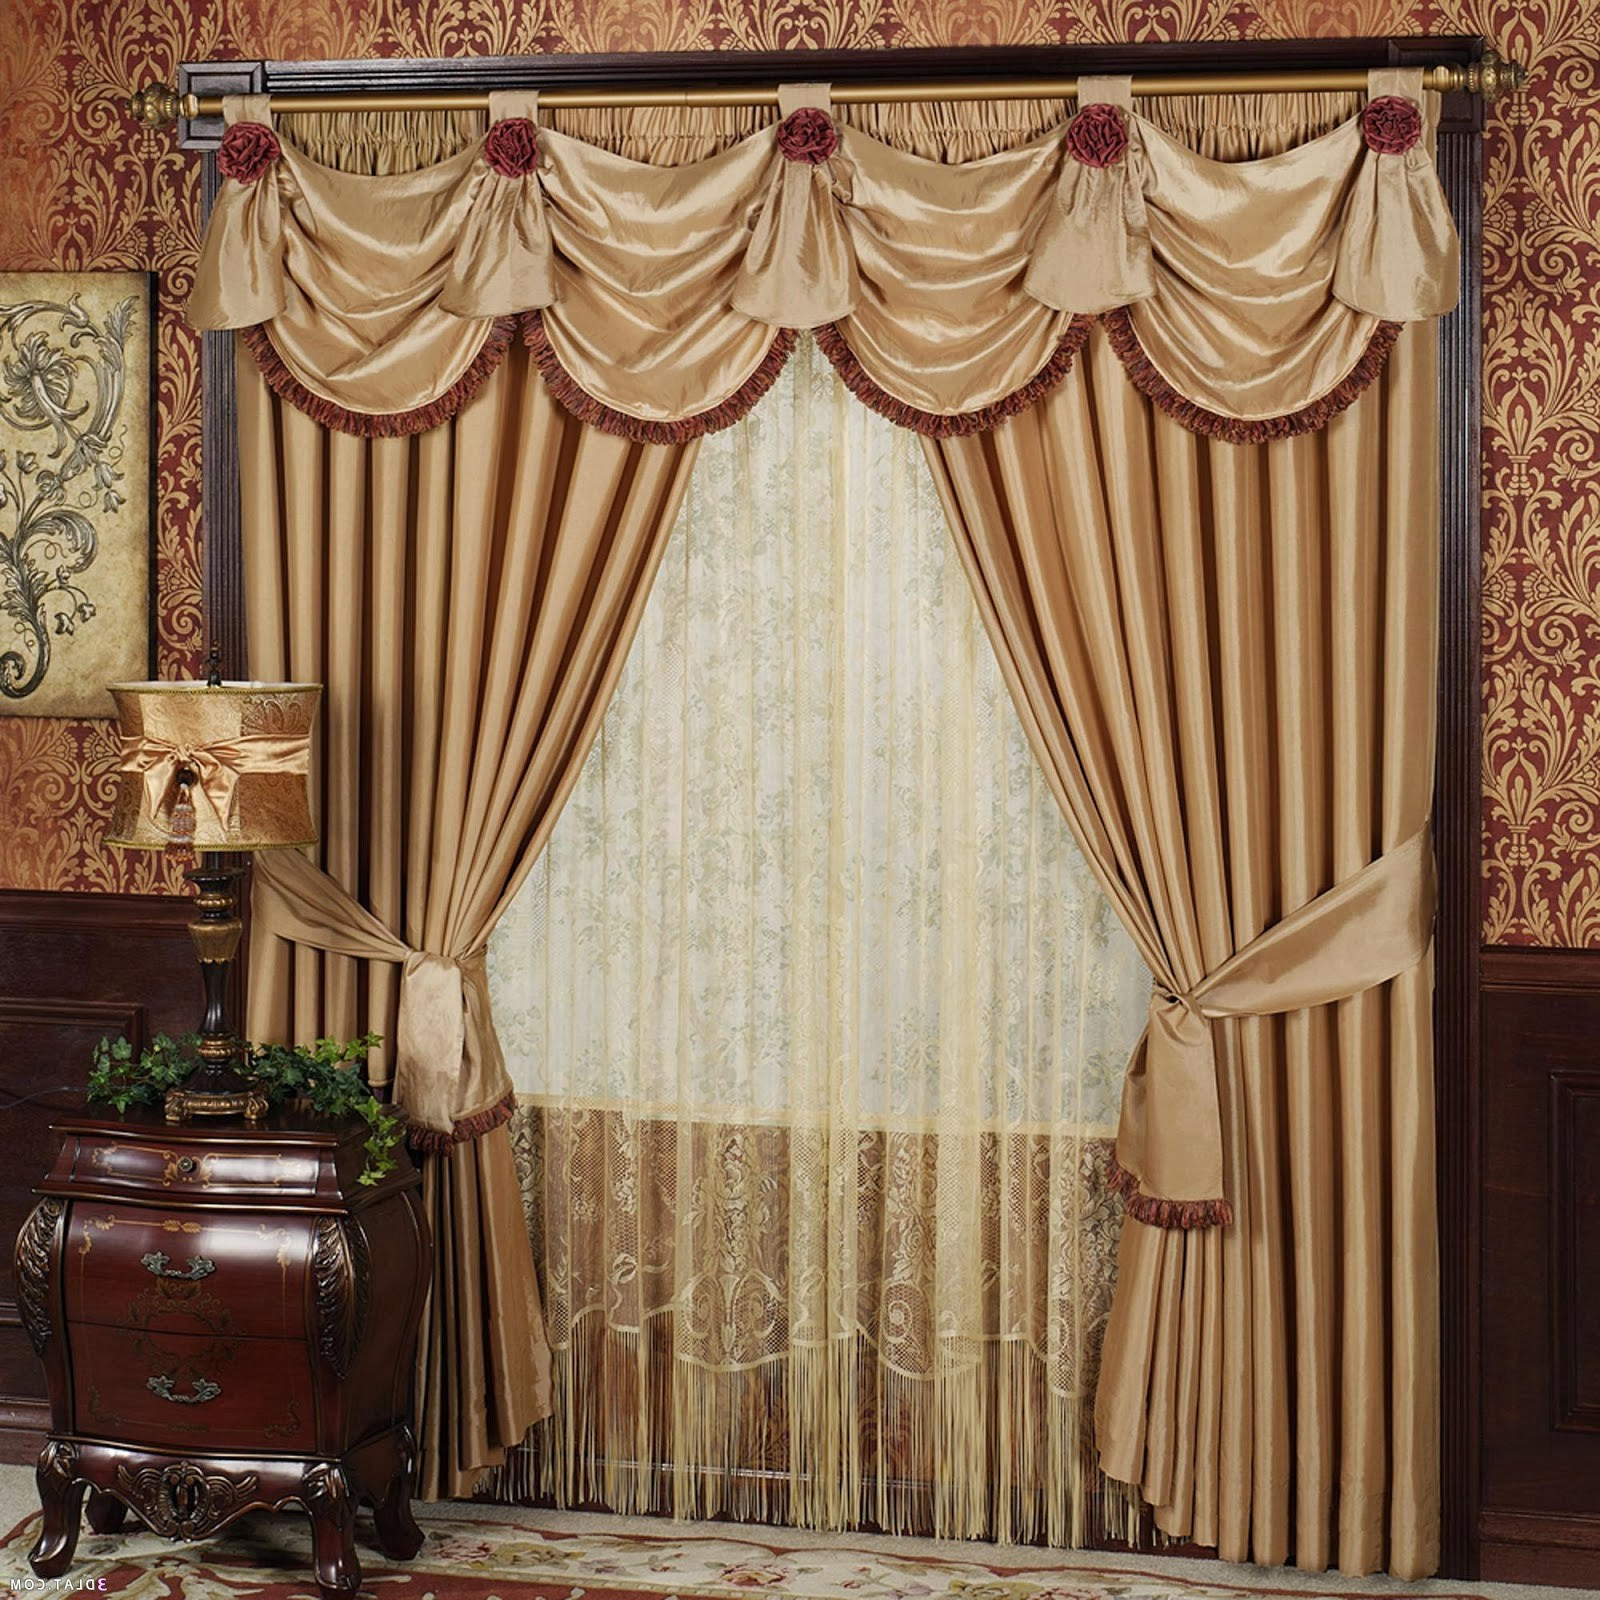 Curtain Patterns For Living Room
 Living Room Curtains Designs Excellent Intended Window